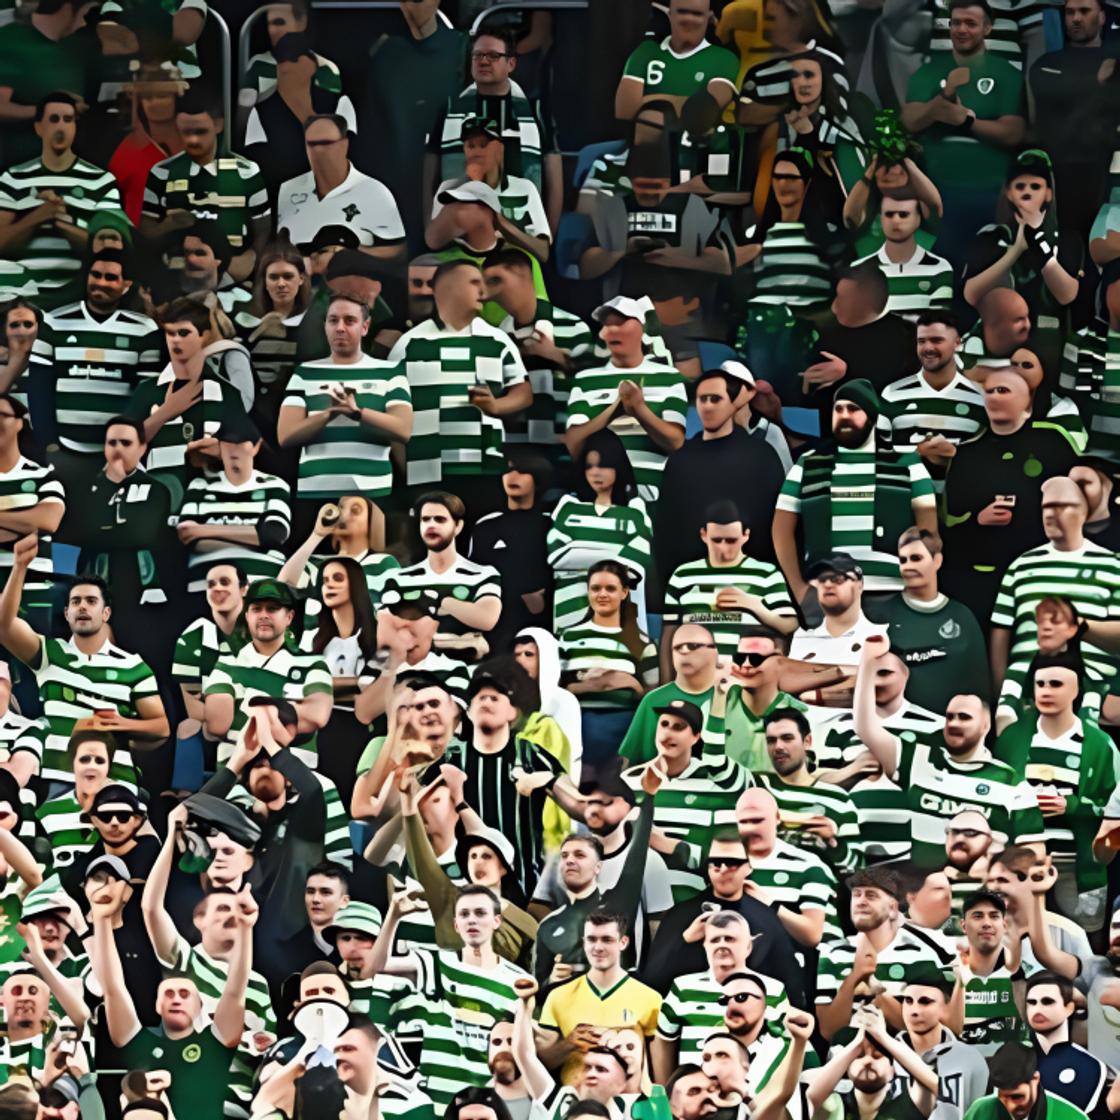 Celtic supporters